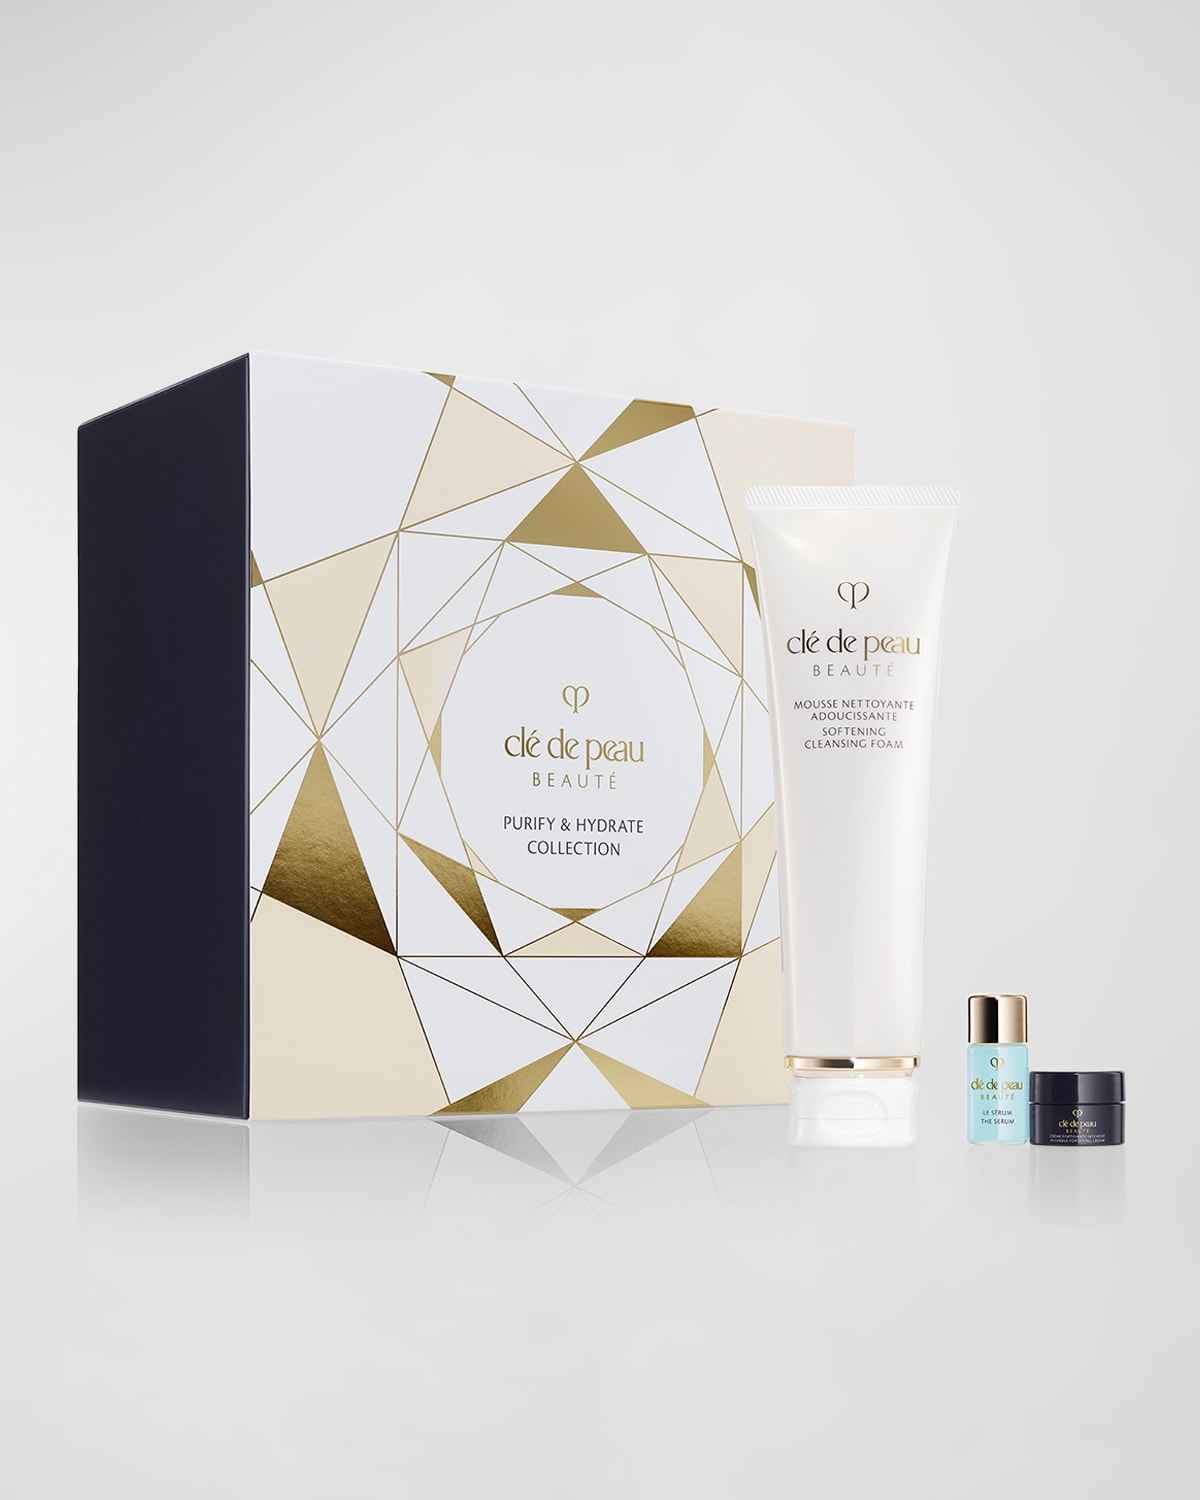 Limited Edition Purify & Hydrate Collection ($106 Value)